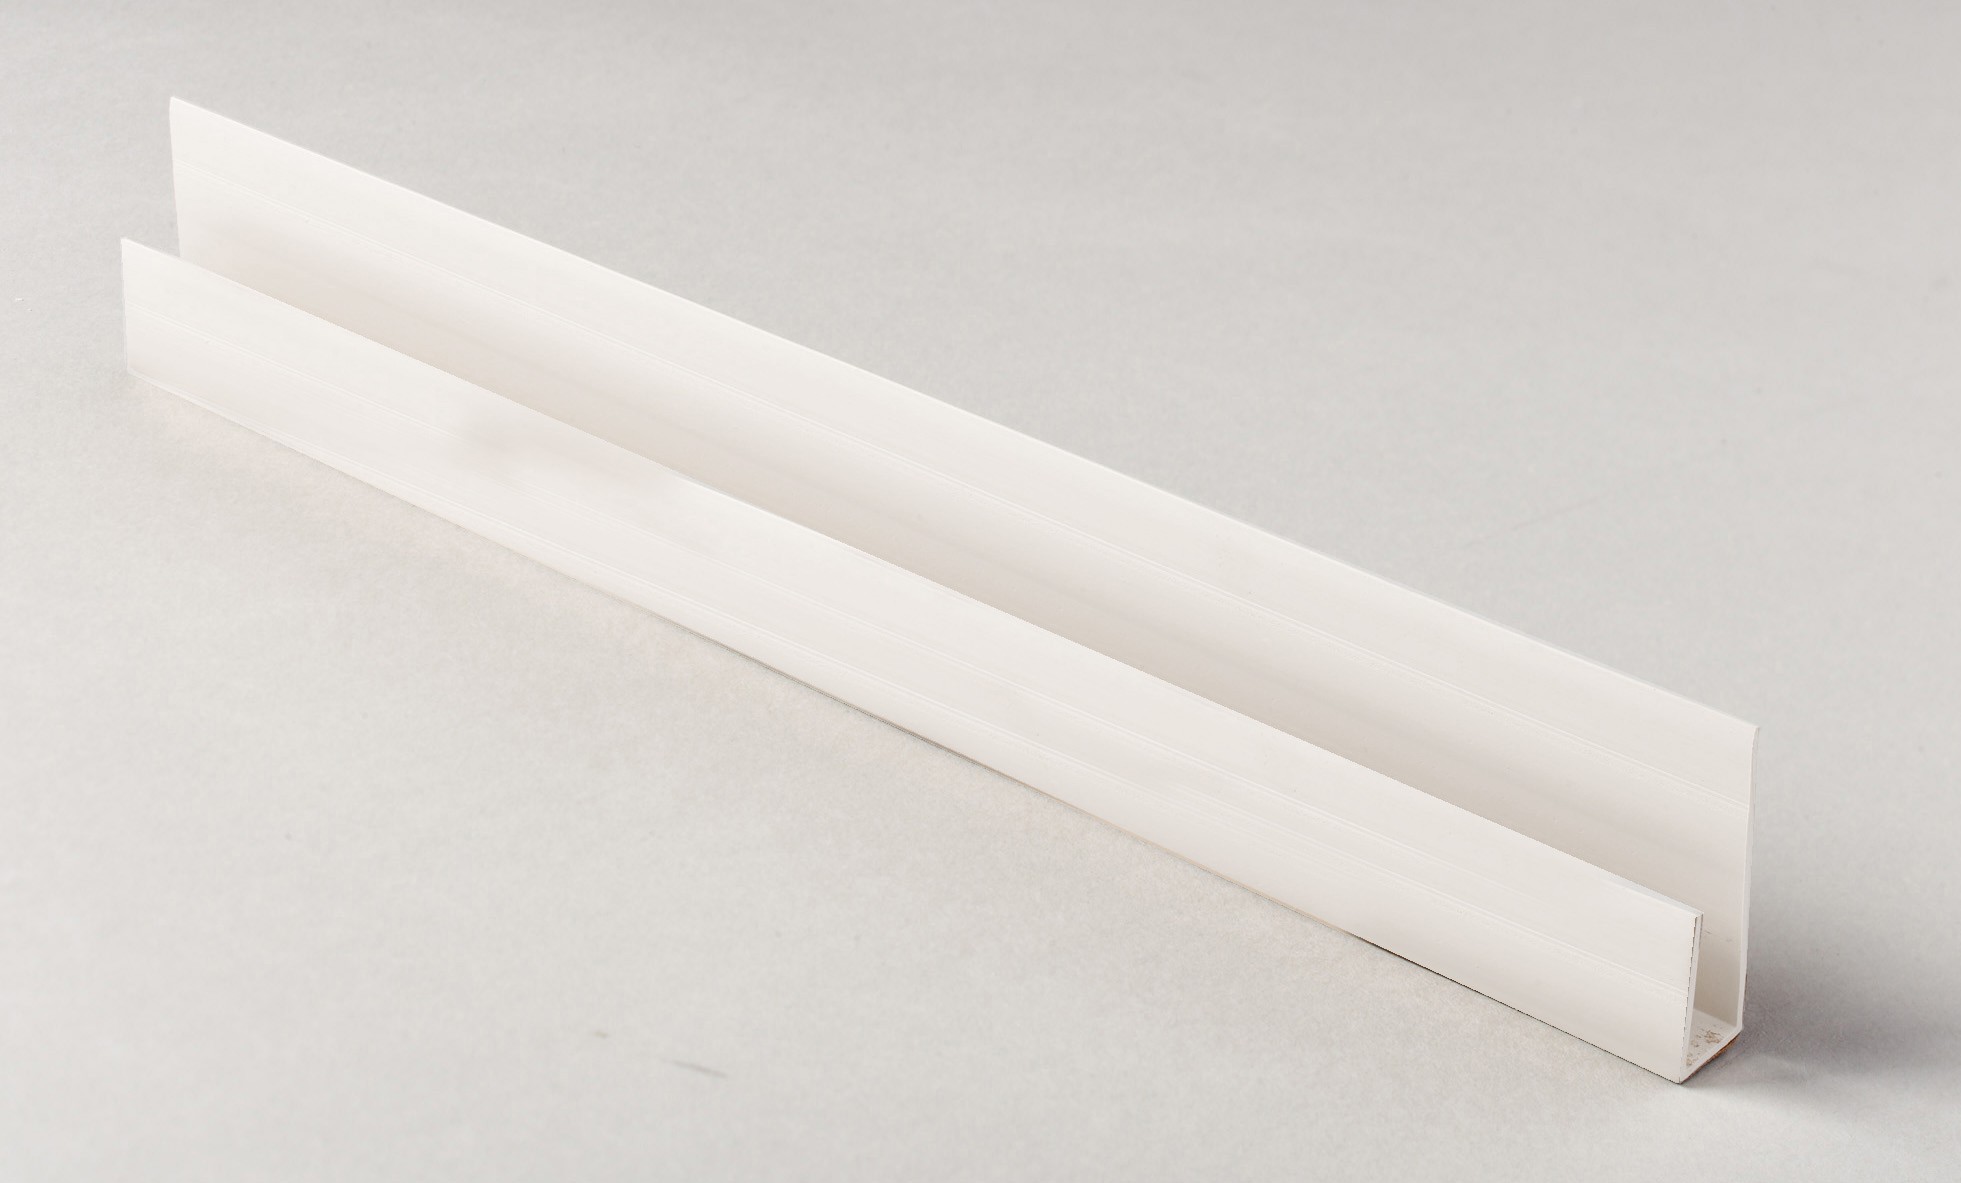 Buy PVC Strengthening Strip for 4mm glazing sheets, 20 pack online today